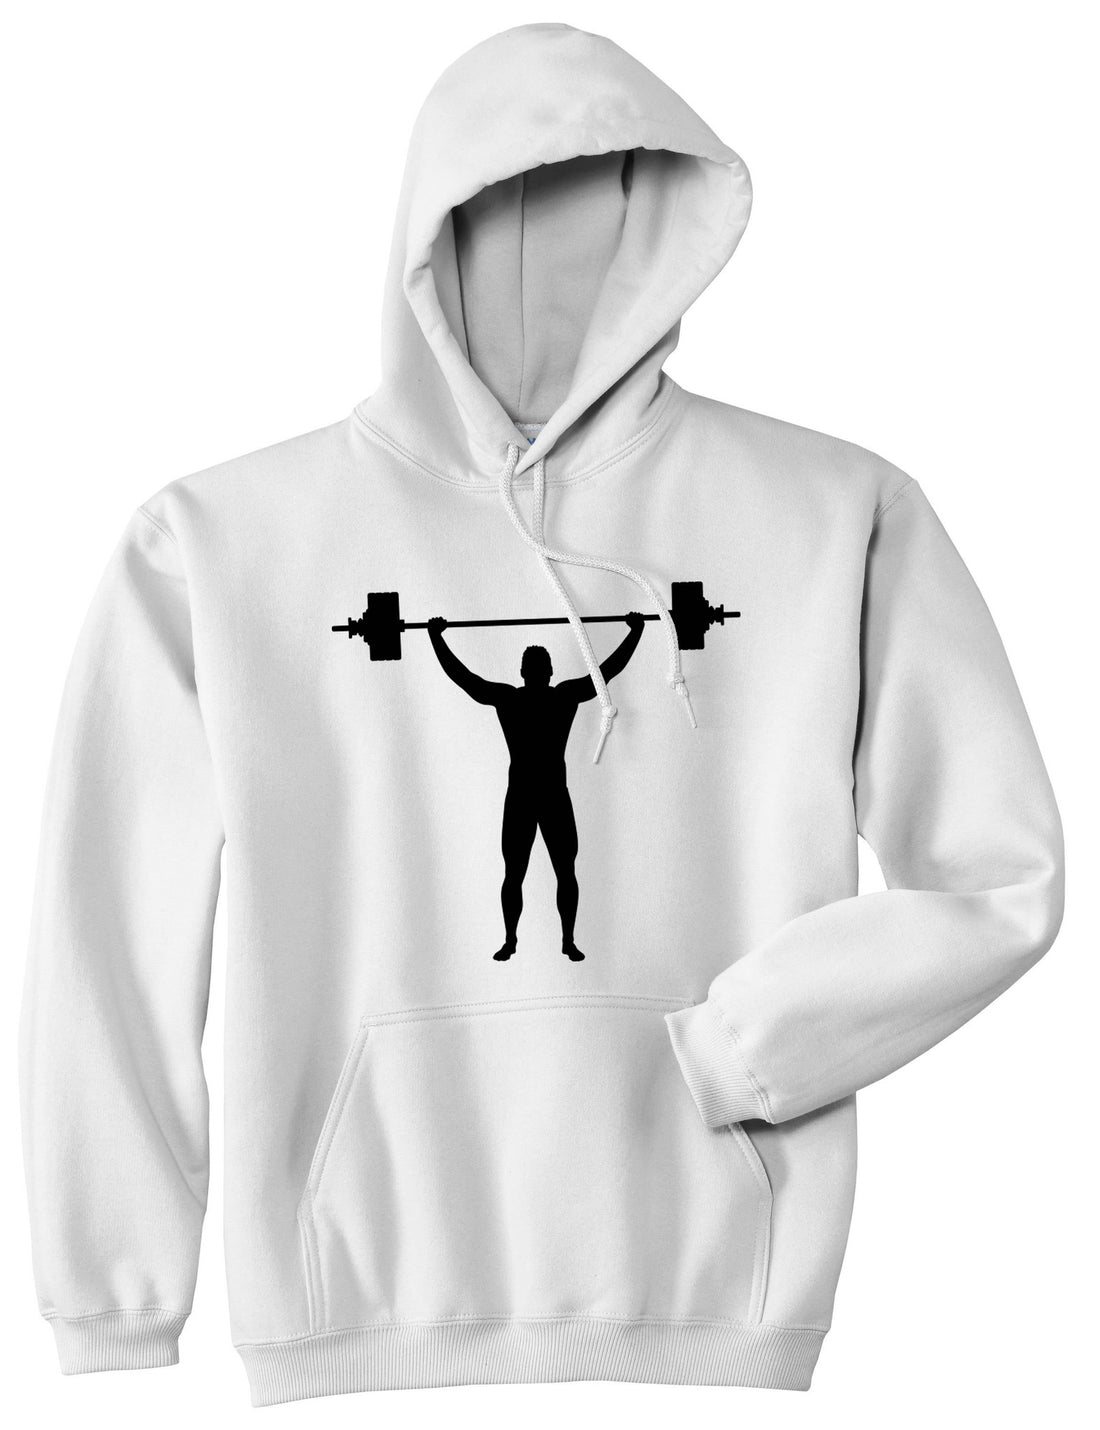 GYM Weight Lifting Workout Pullover Hoodie